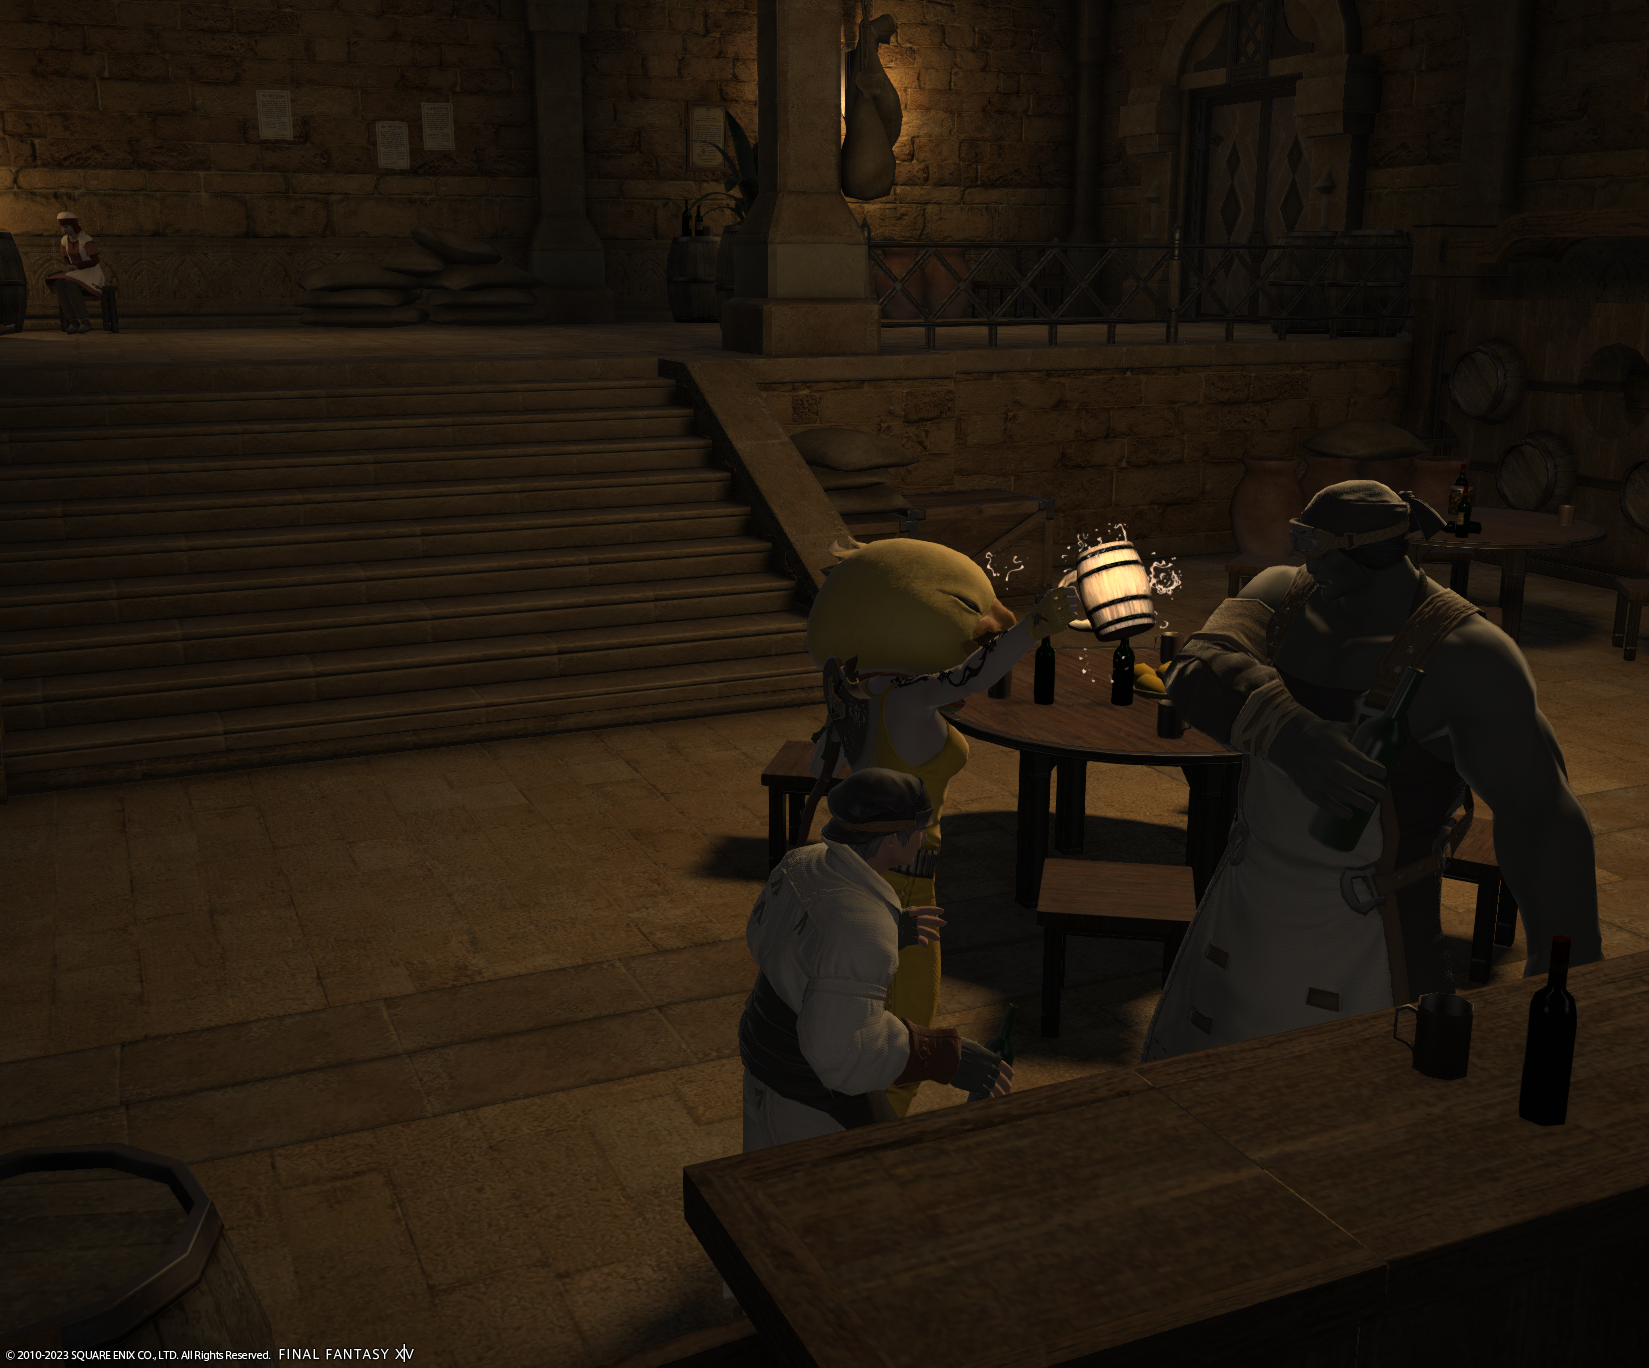 An FFXIV screenshot. A character in a fat chocobo head is lifting a mug with others in a bar.